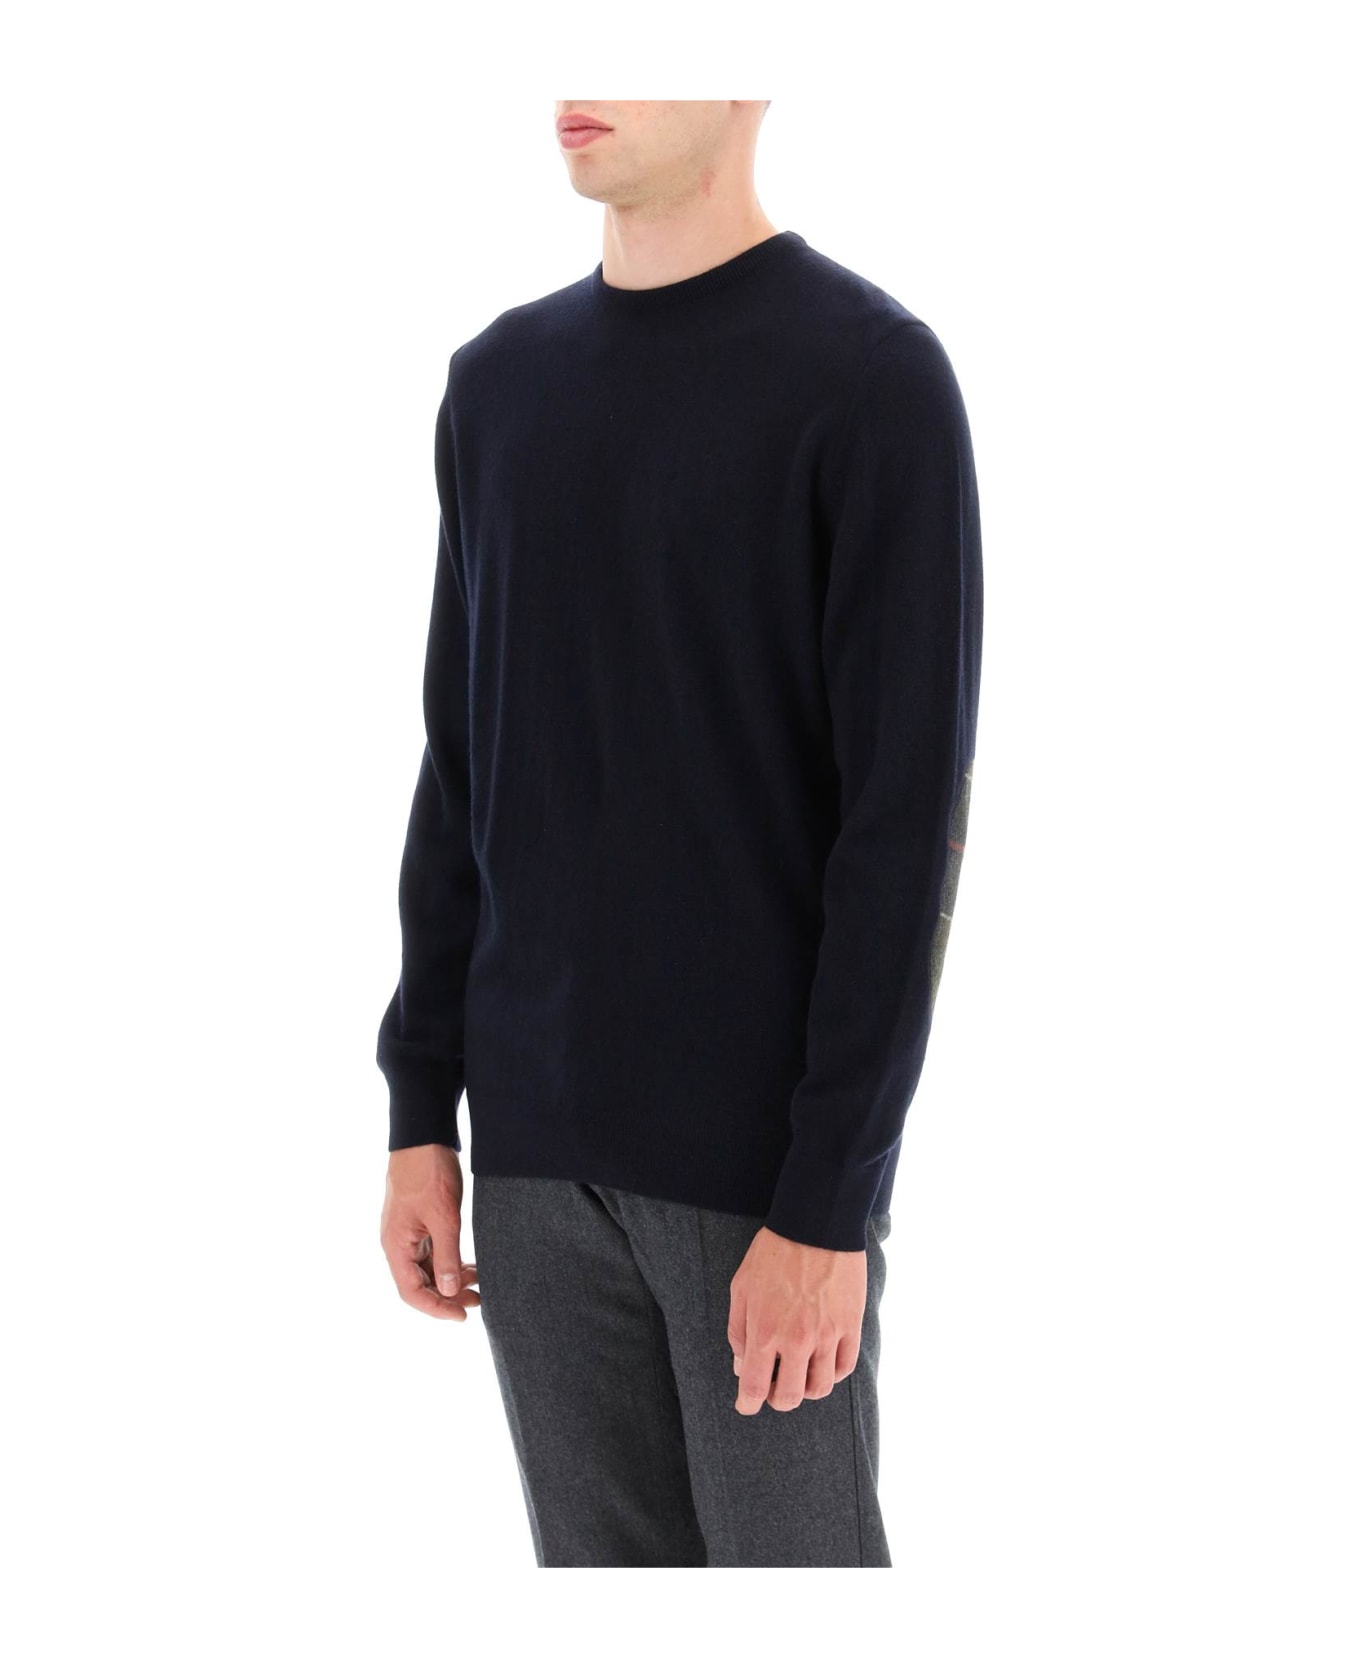 Barbour 'harrow' Wool And Cashmere Sweater - Navy